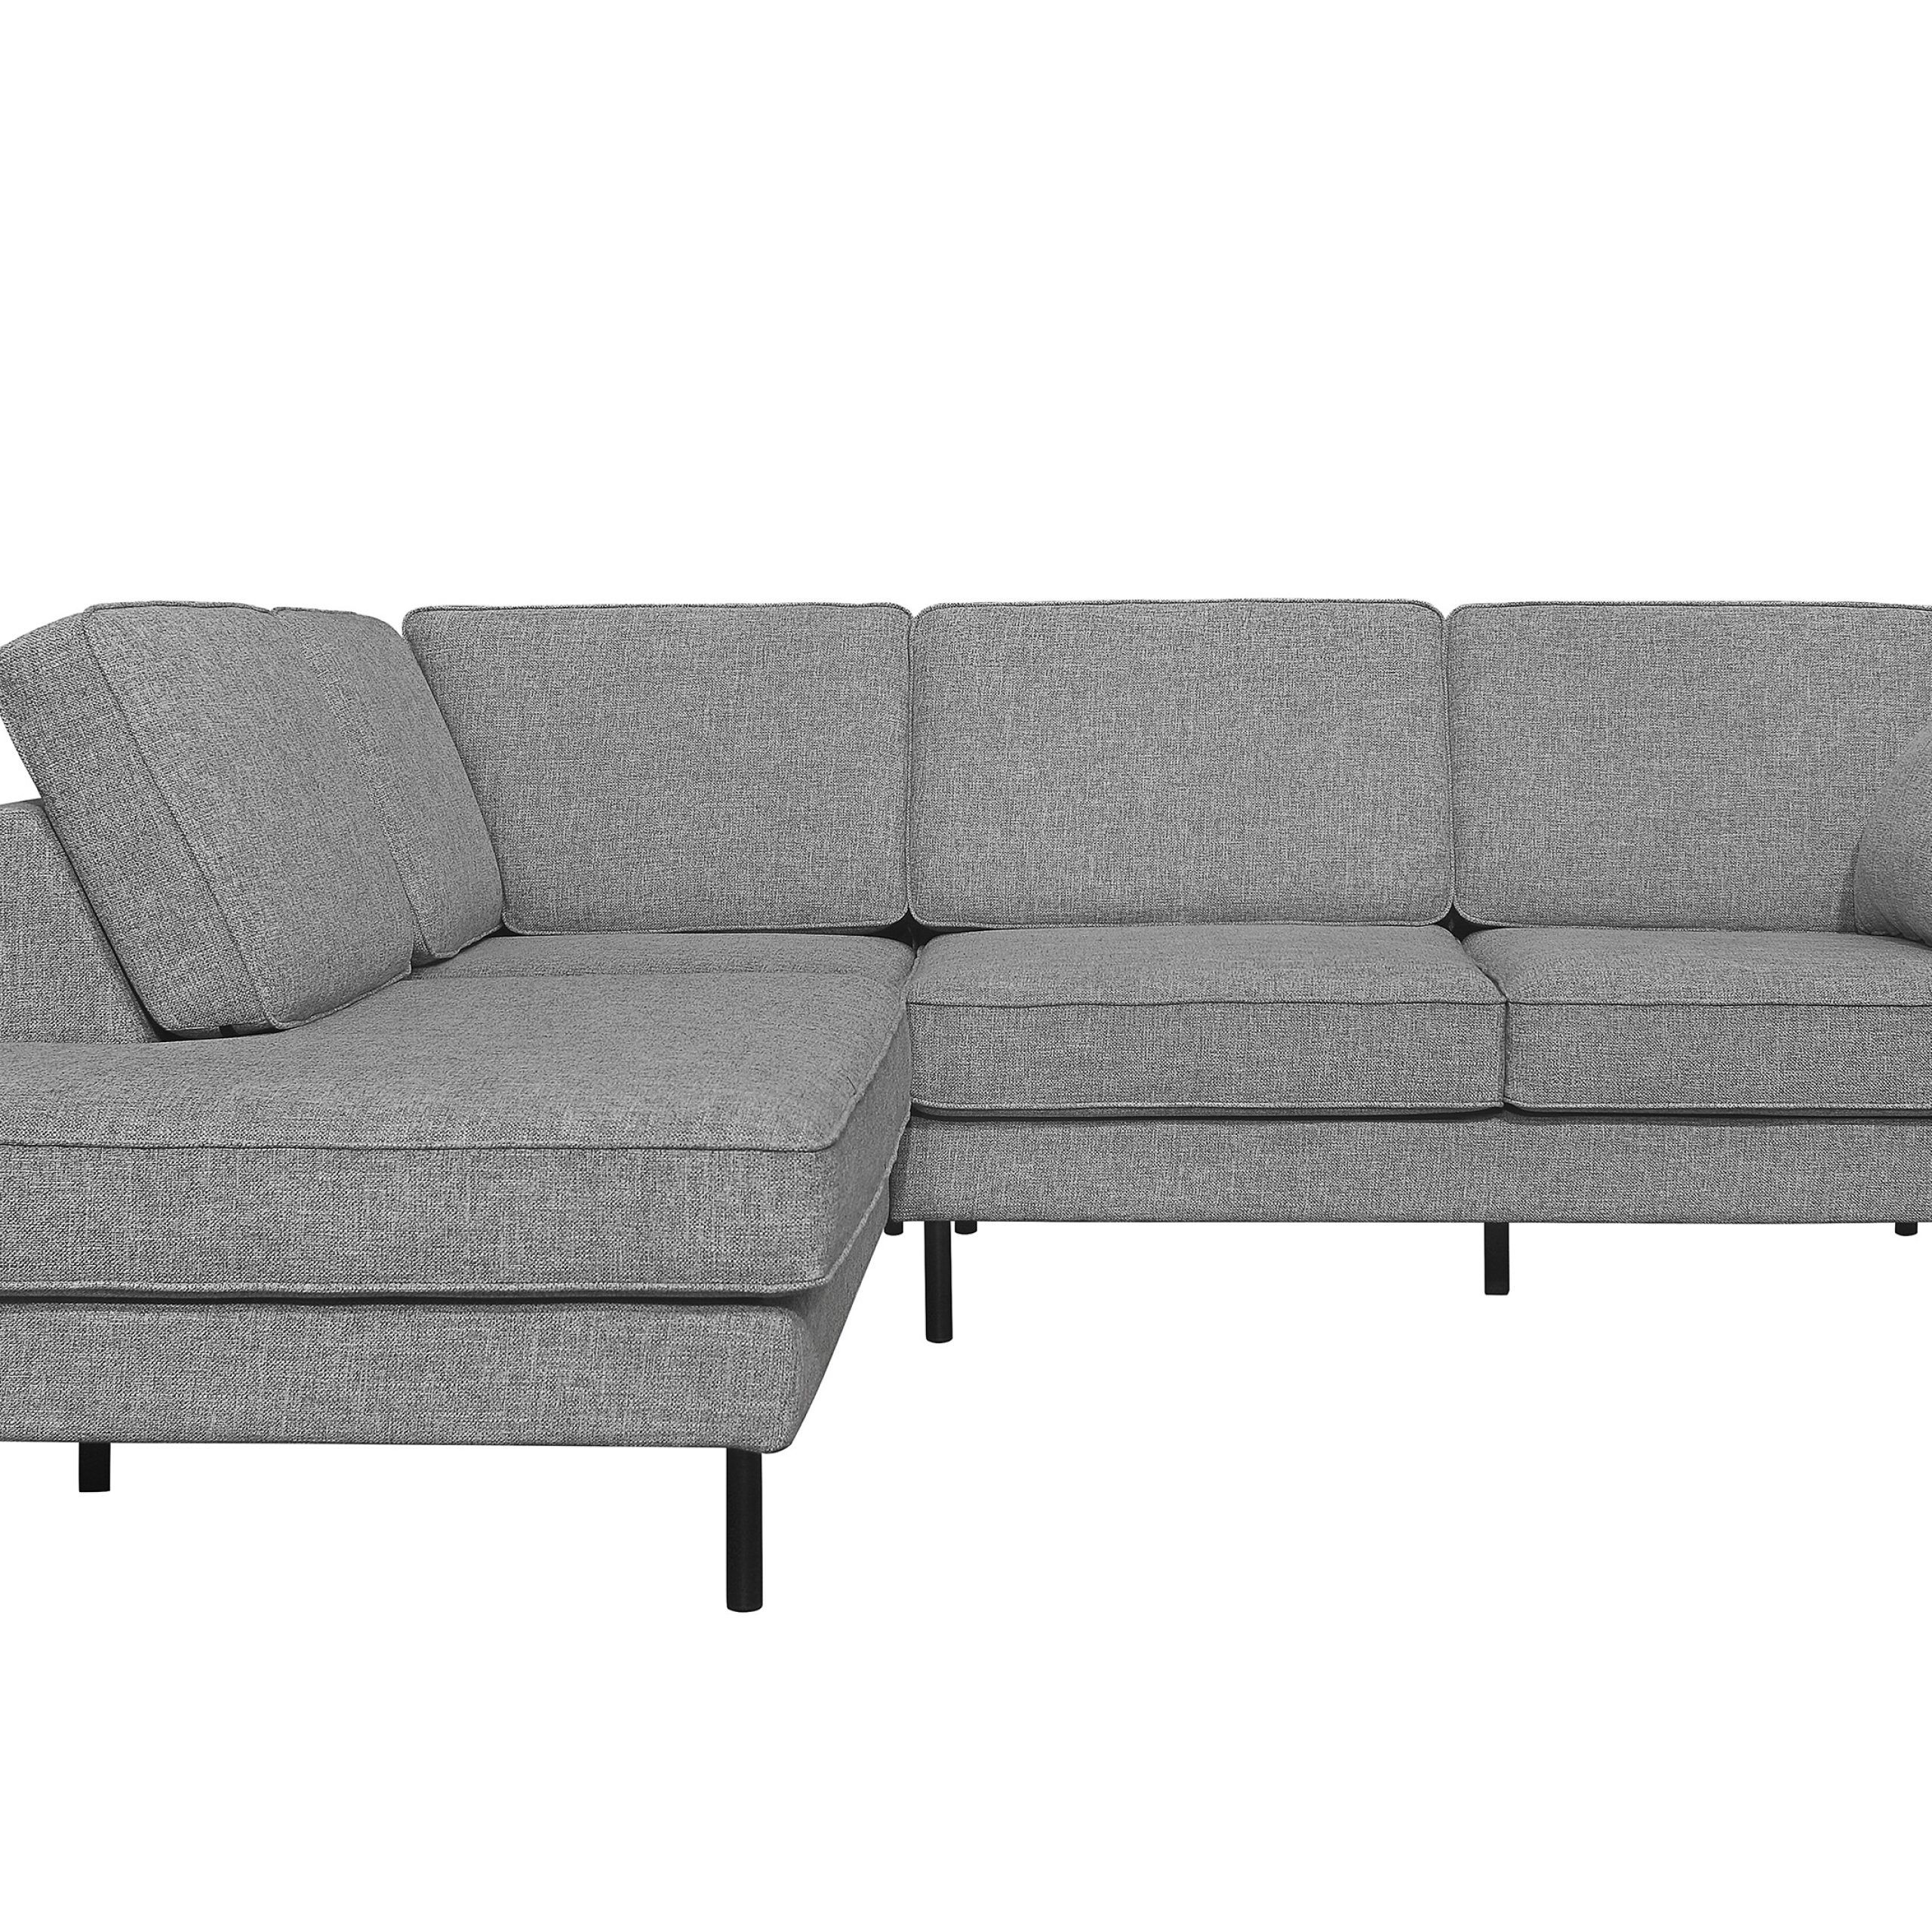 Cerny 4 Seater Right L Shape Sofa When Seated (Light Grey) | Furniture &  Home Décor | Fortytwo With Regard To 3 Seat L Shaped Sofas In Black (View 8 of 15)